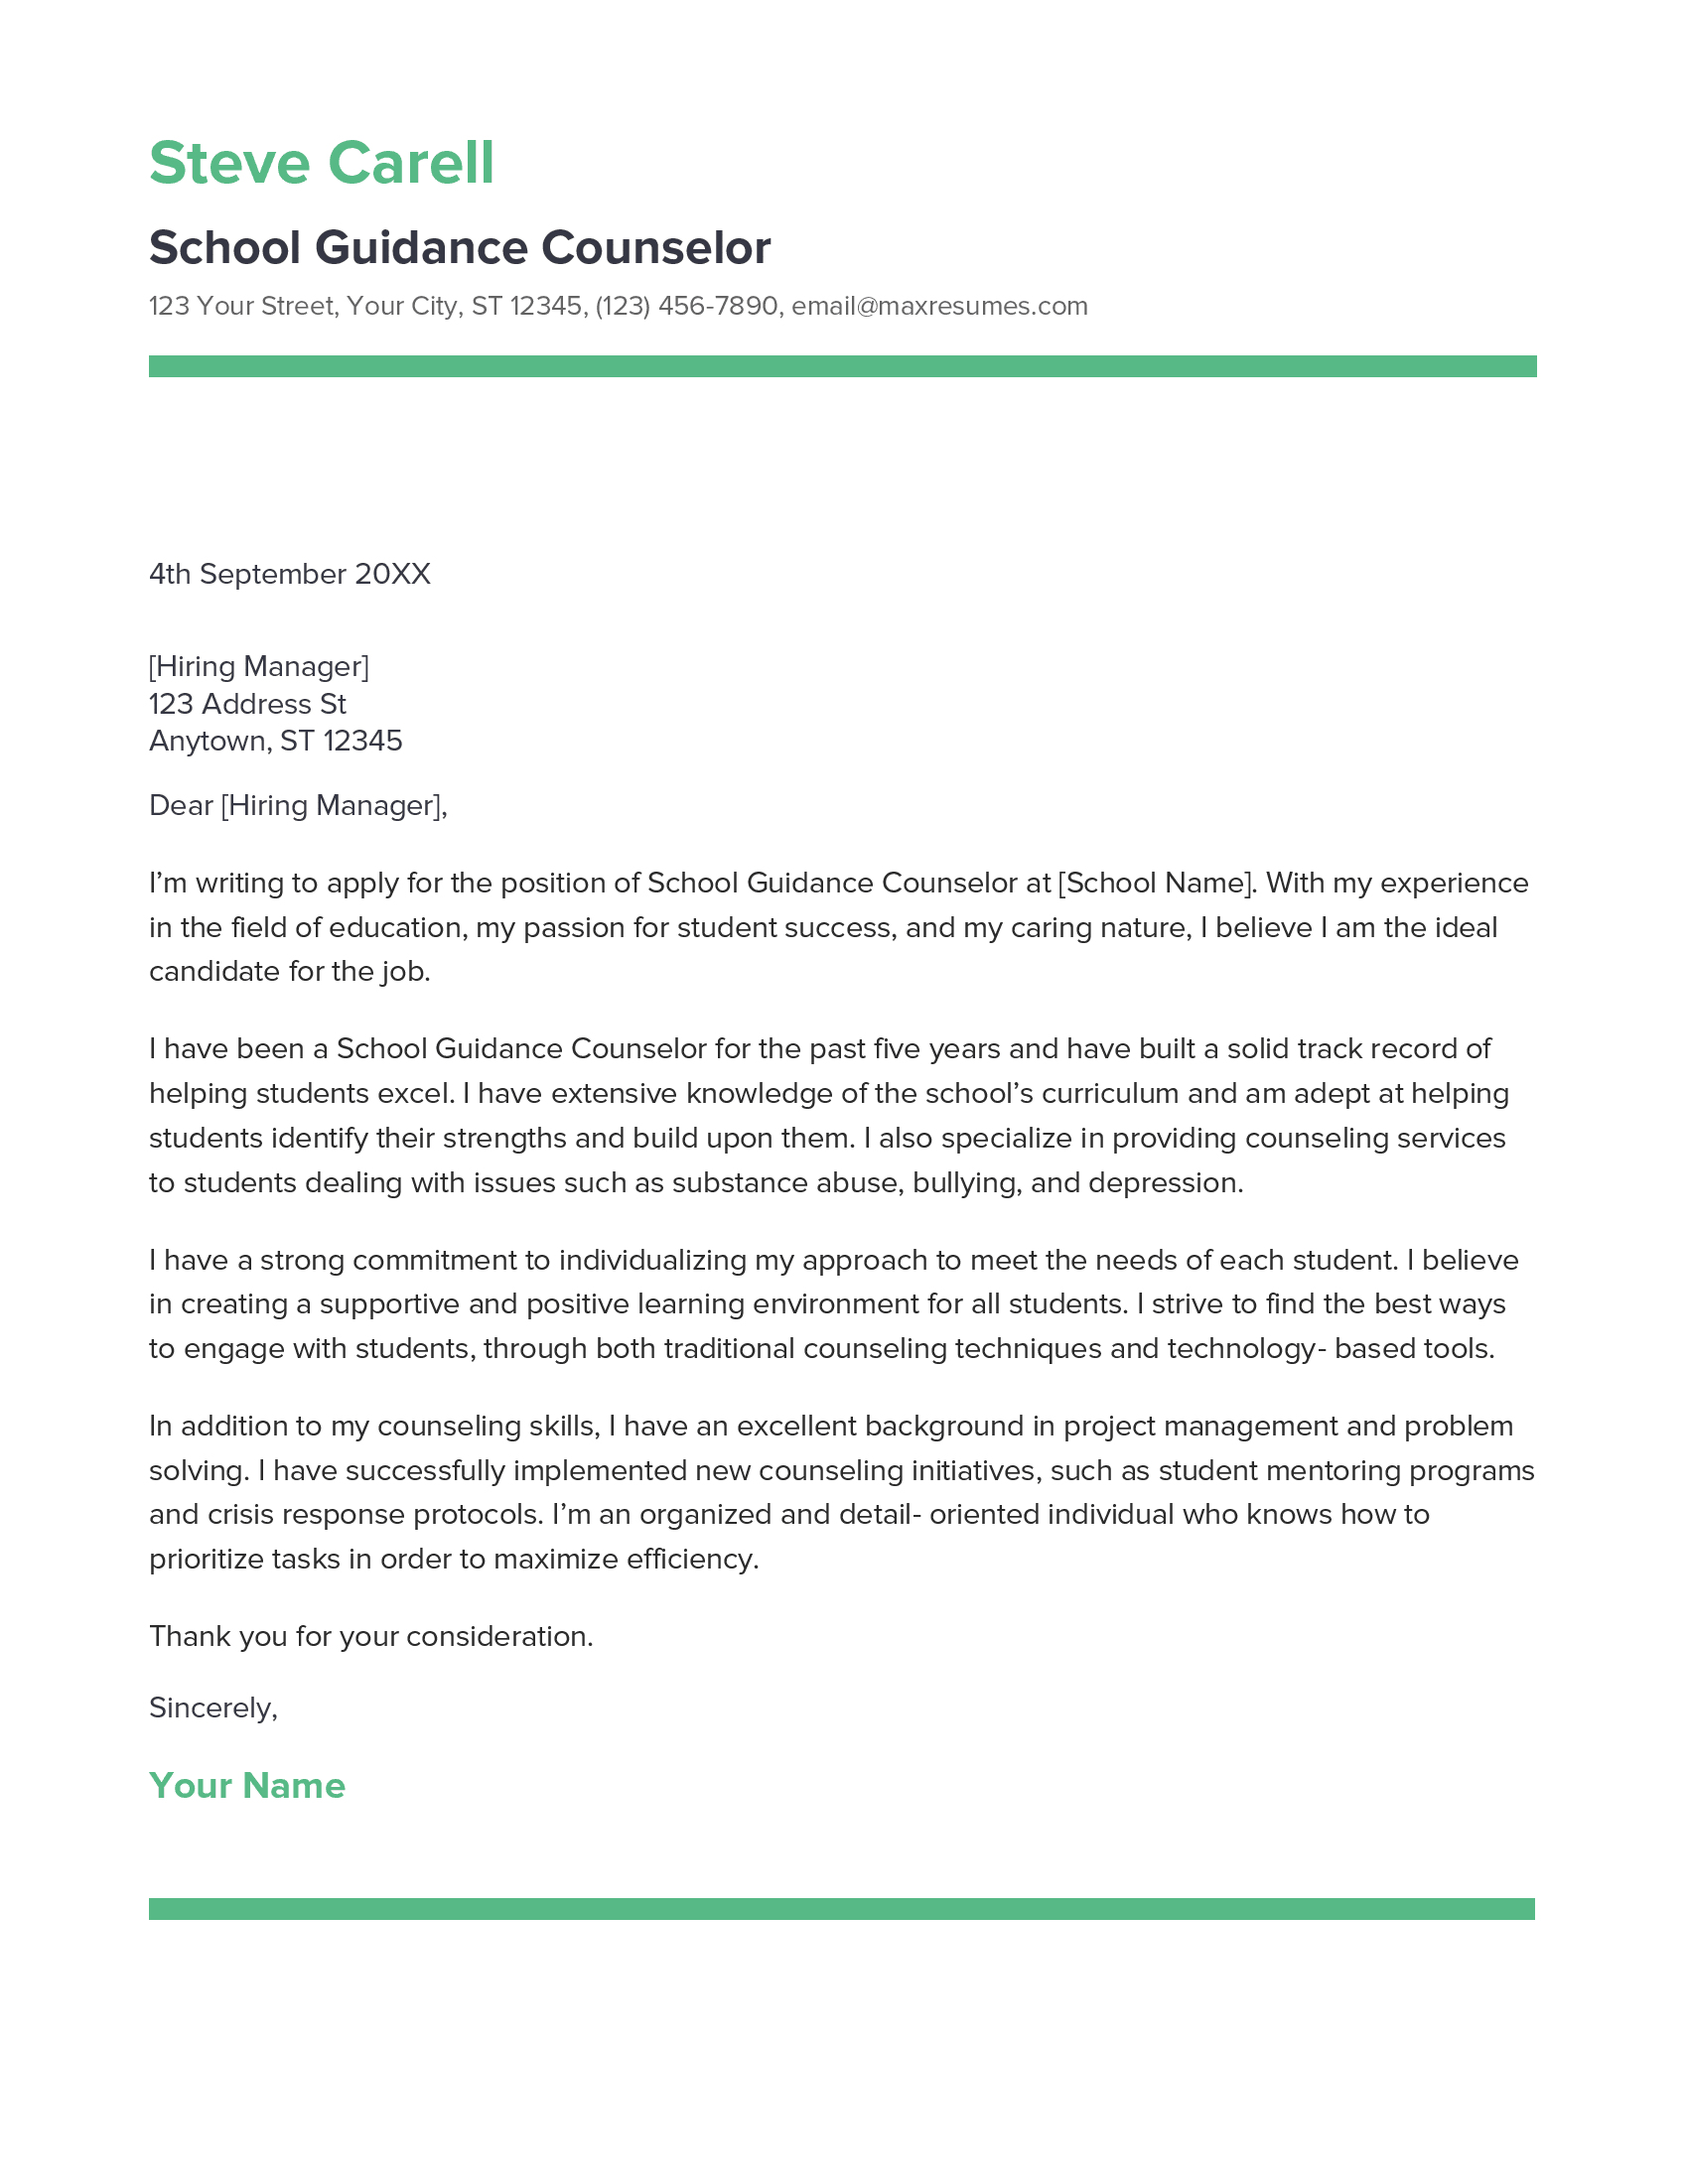 School Guidance Counselor Cover Letter Example